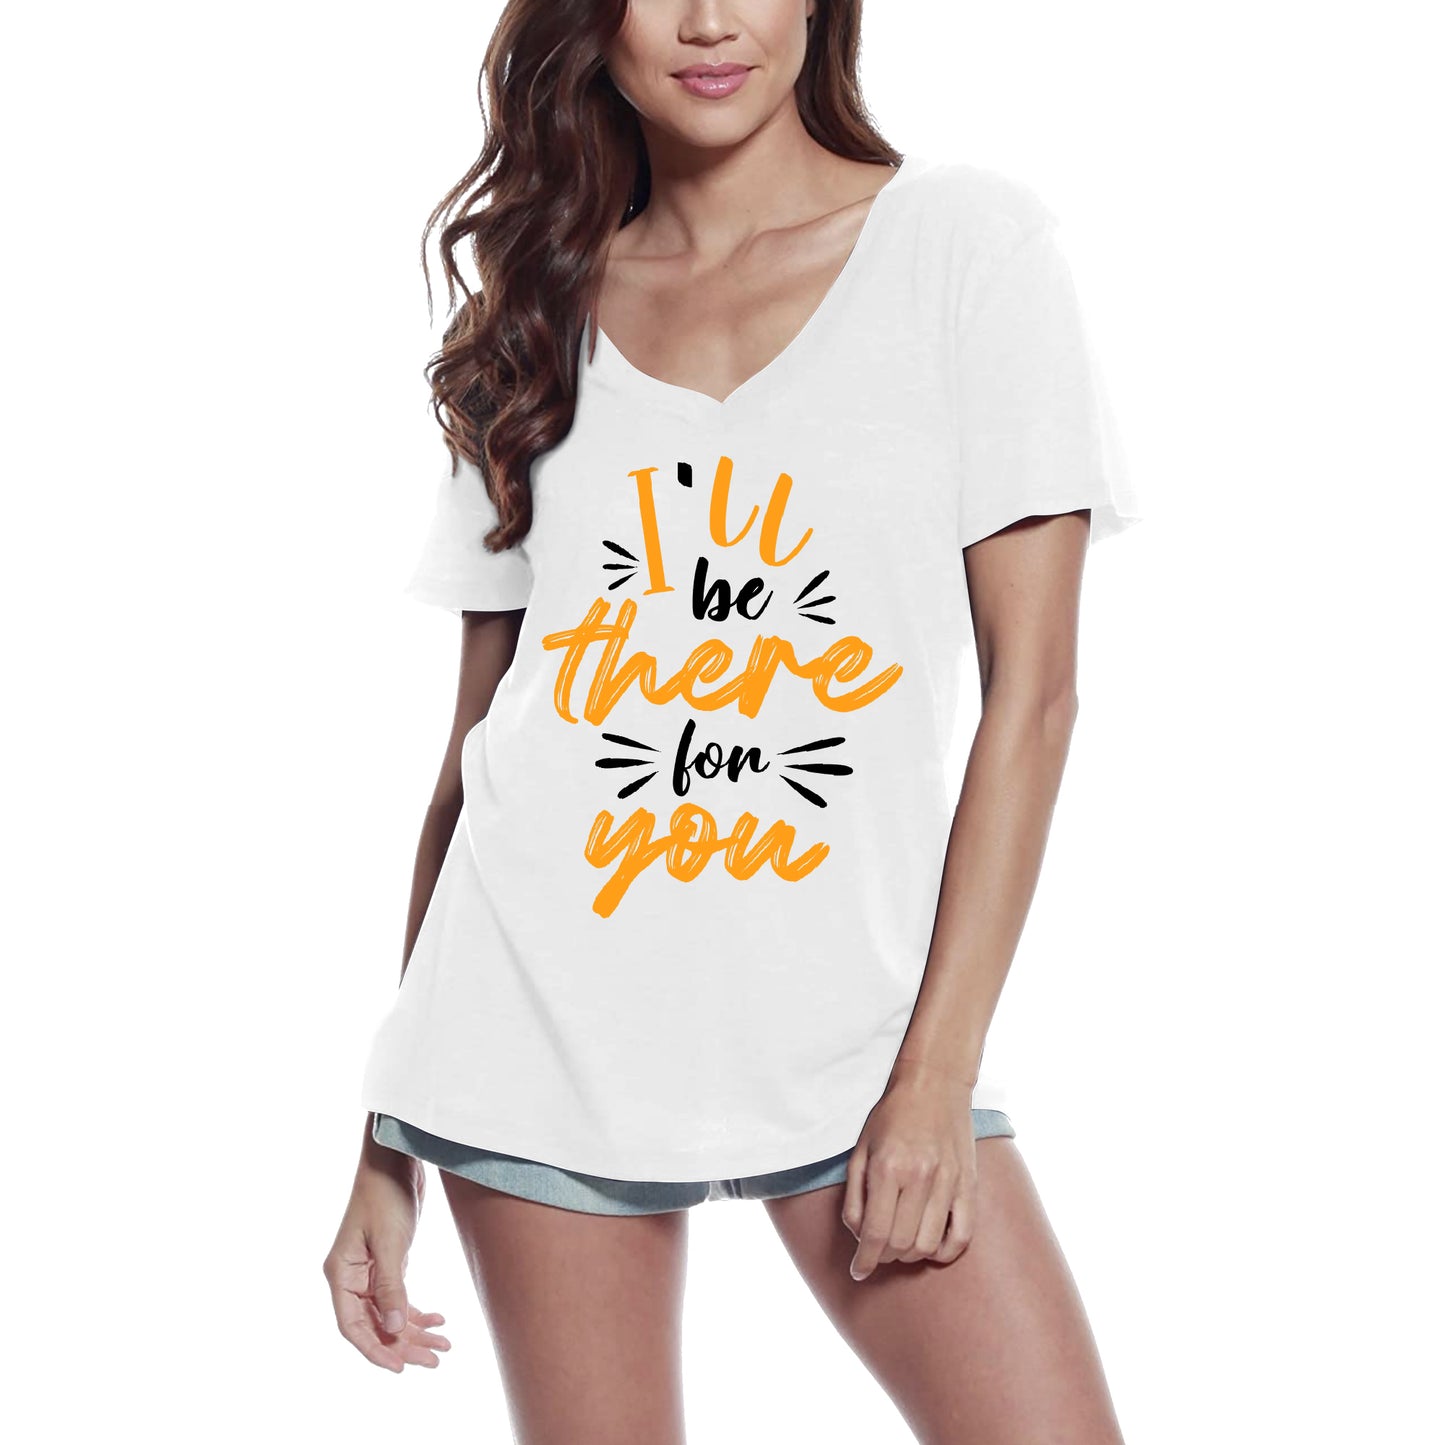 ULTRABASIC Women's T-Shirt I'll be There for You - Romantic Love Quote Shirt